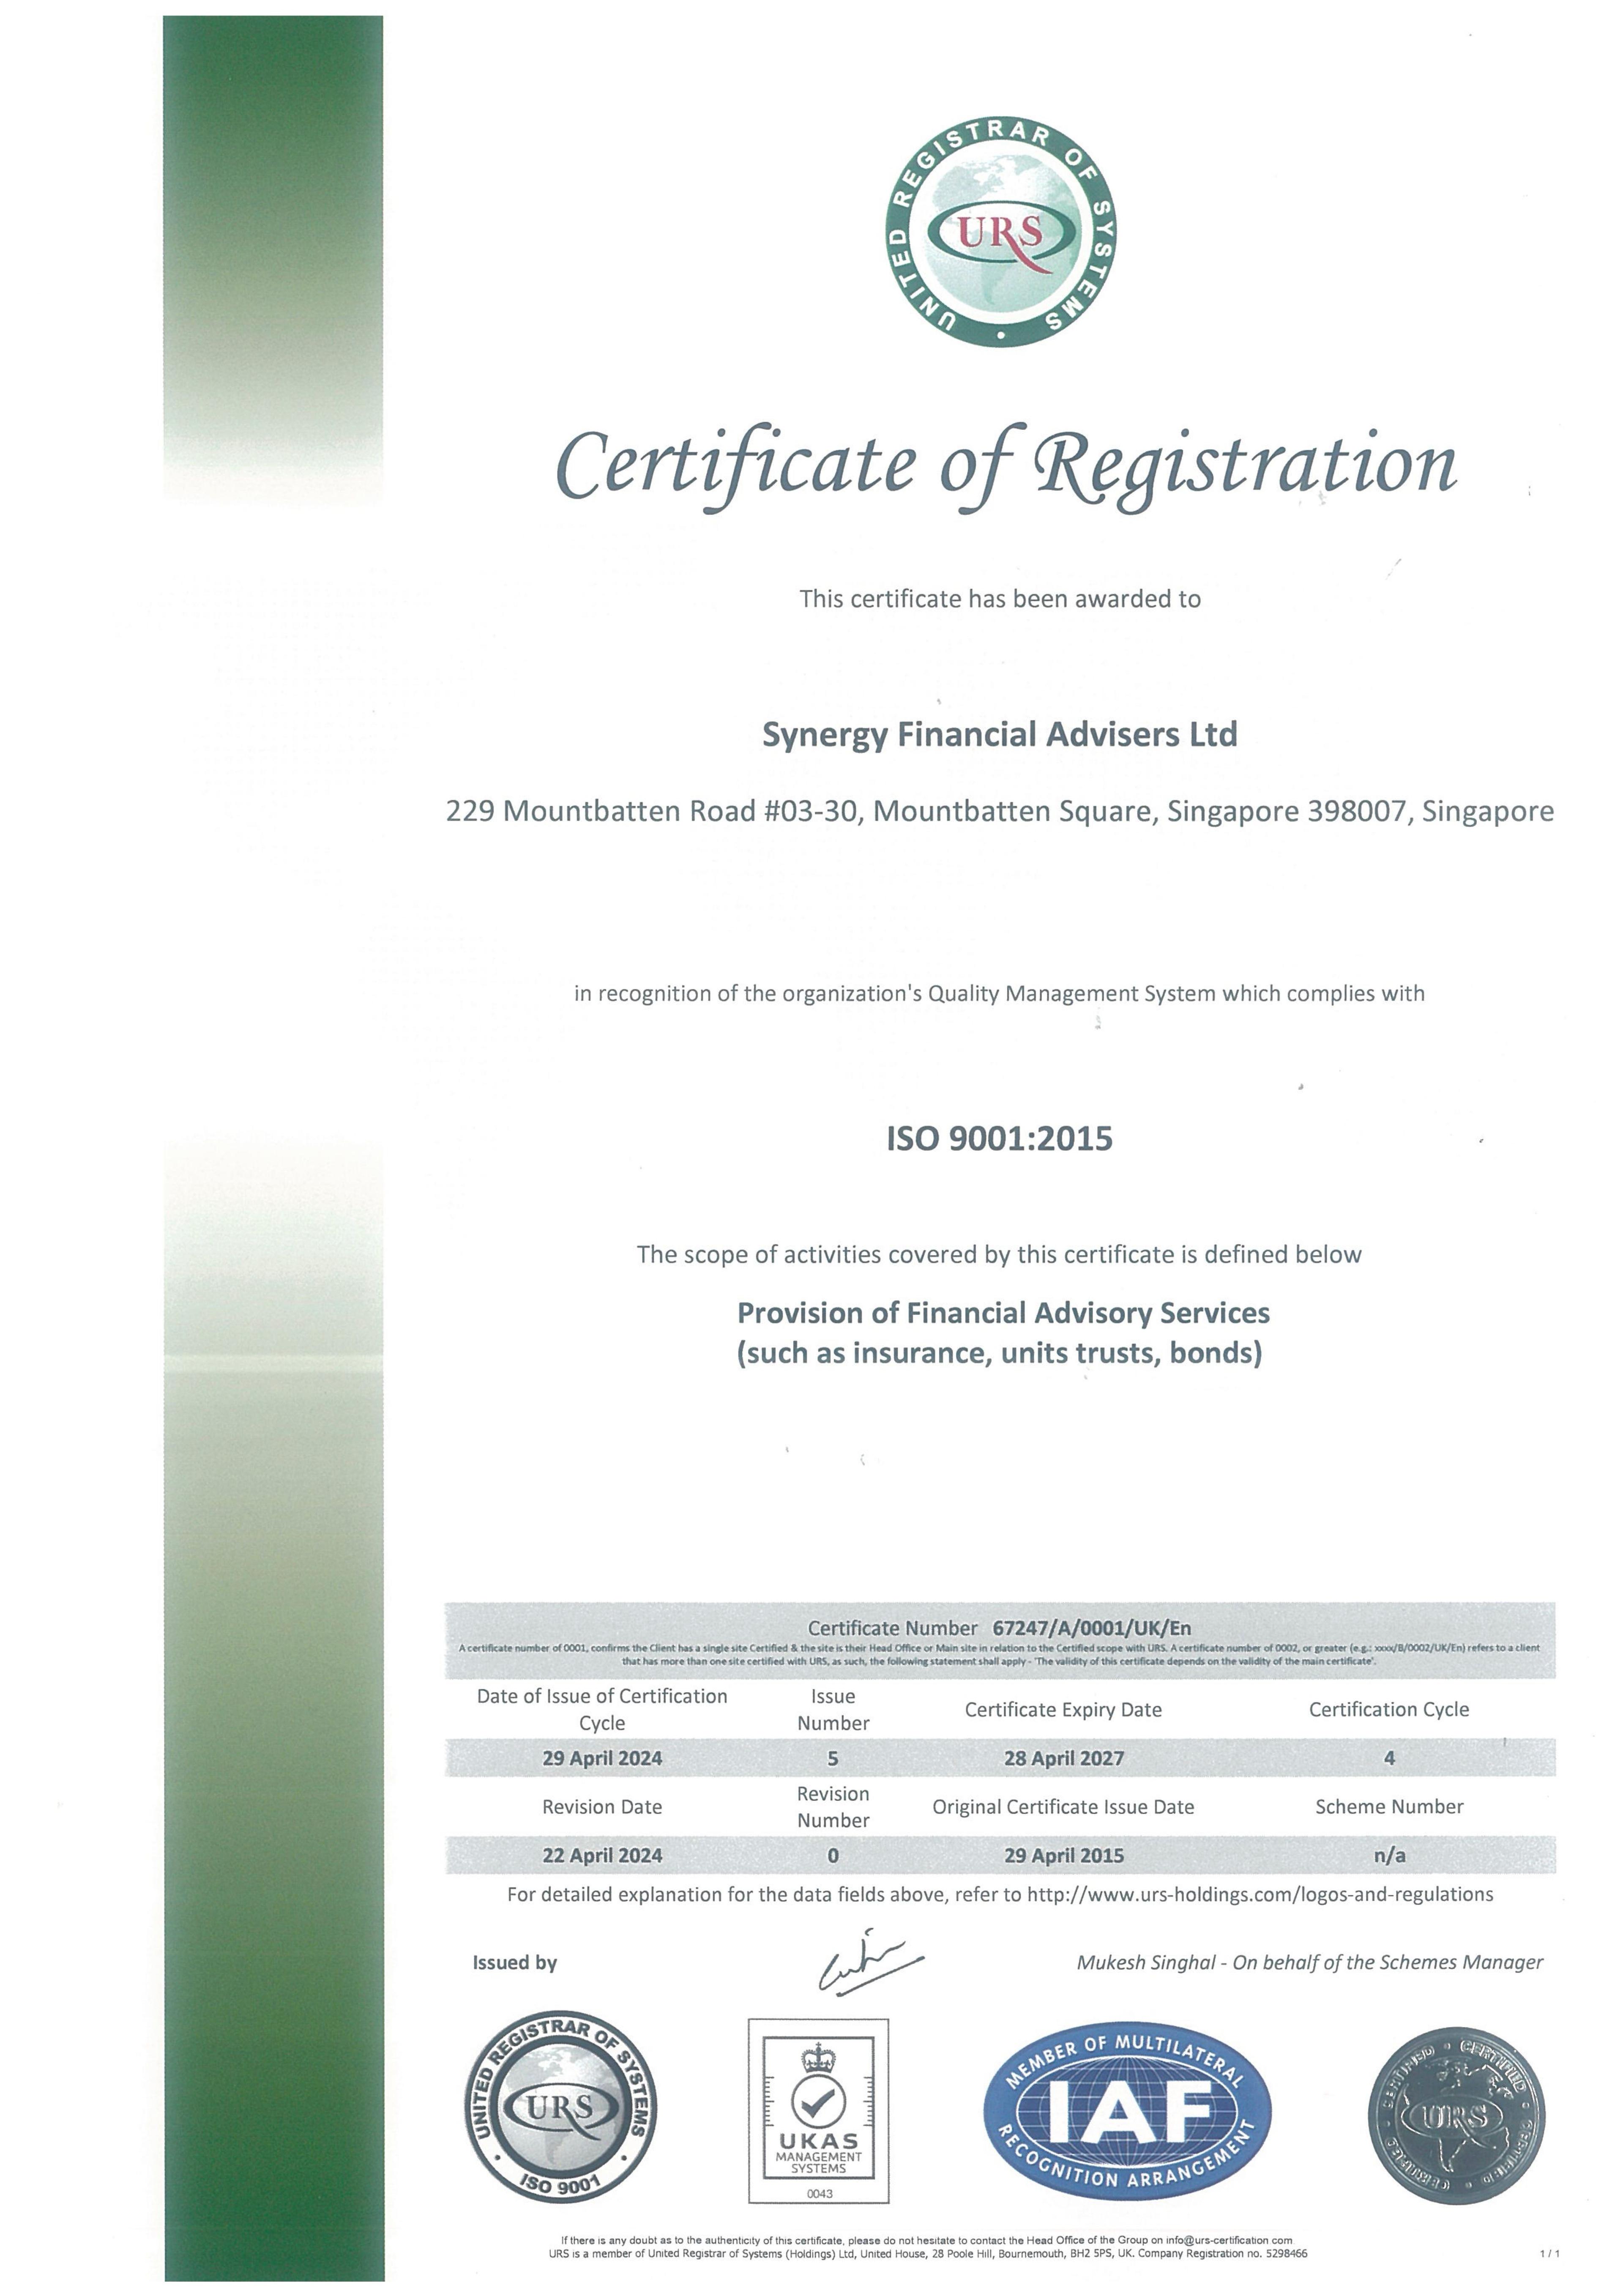 Recertification of ISO 9001 in 2024